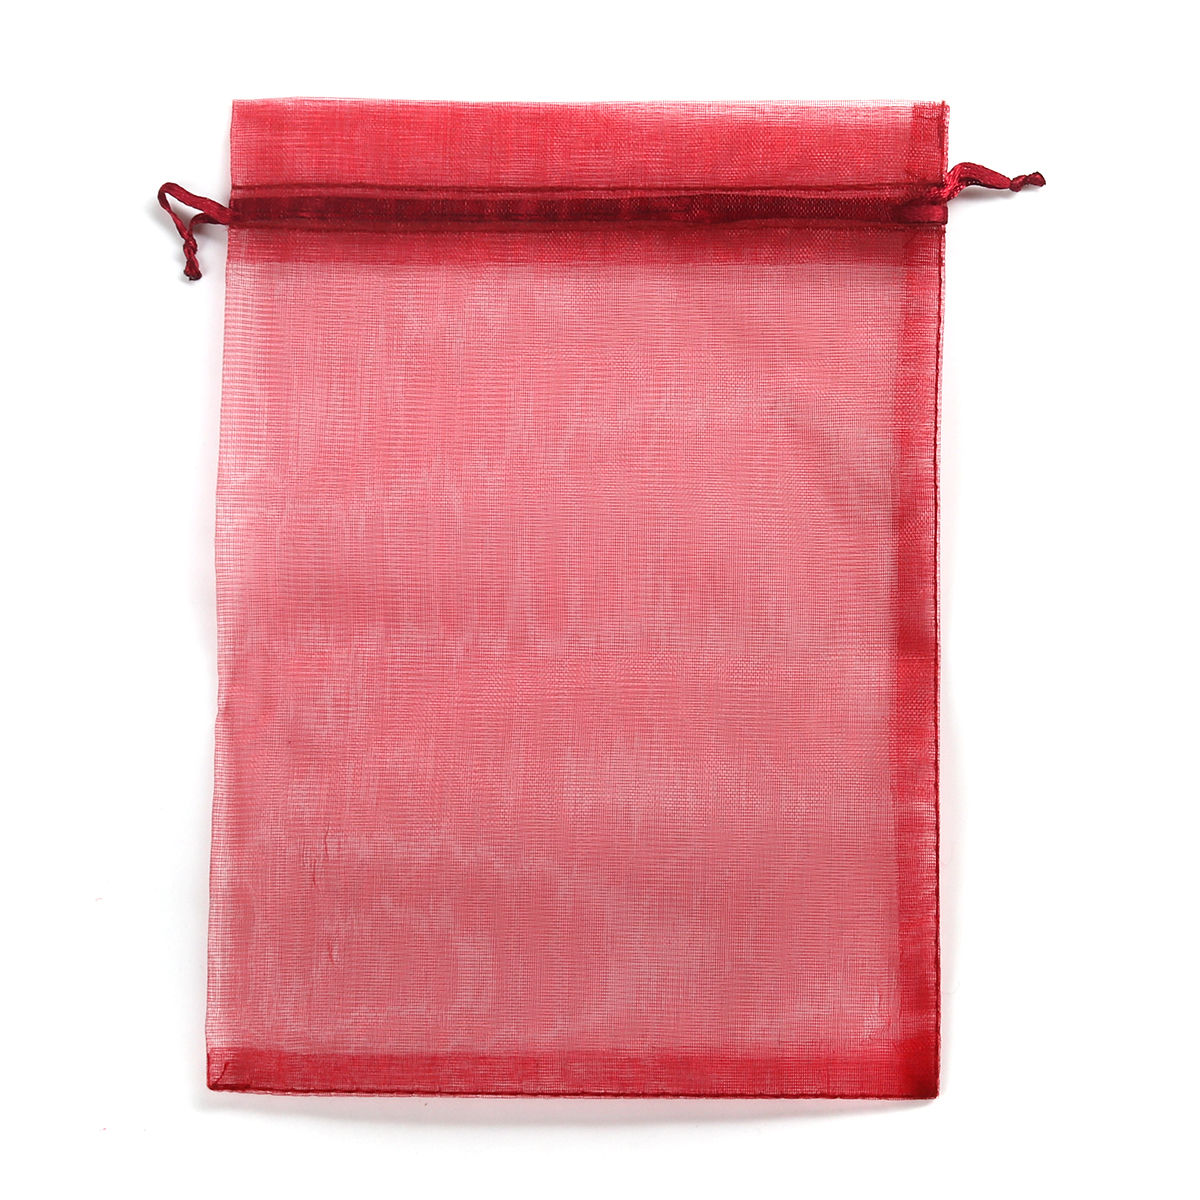 Picture of Wedding Gift Organza Jewelry Bags Drawstring Rectangle Wine Red (Usable Space: 15.5x12.5cm) 17.5cm x 12.8cm, 20 PCs